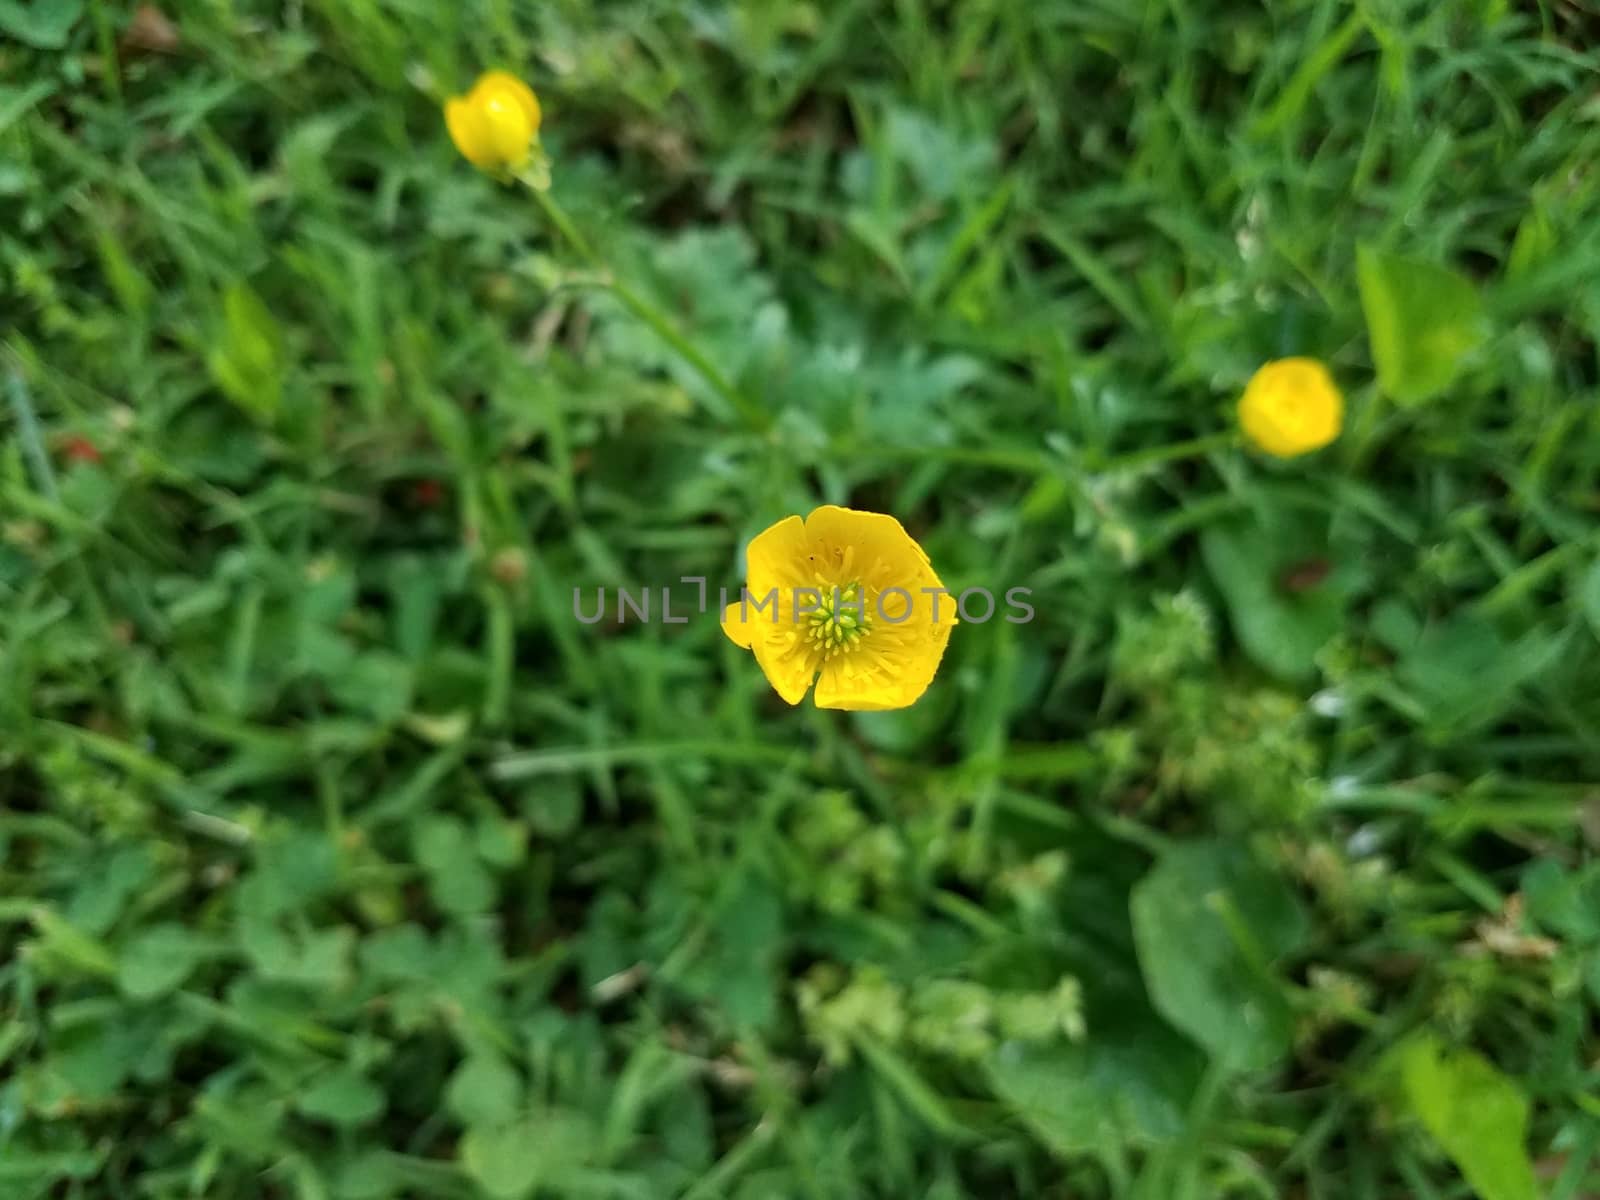 green plant or weed with yellow flower in grass or lawn by stockphotofan1